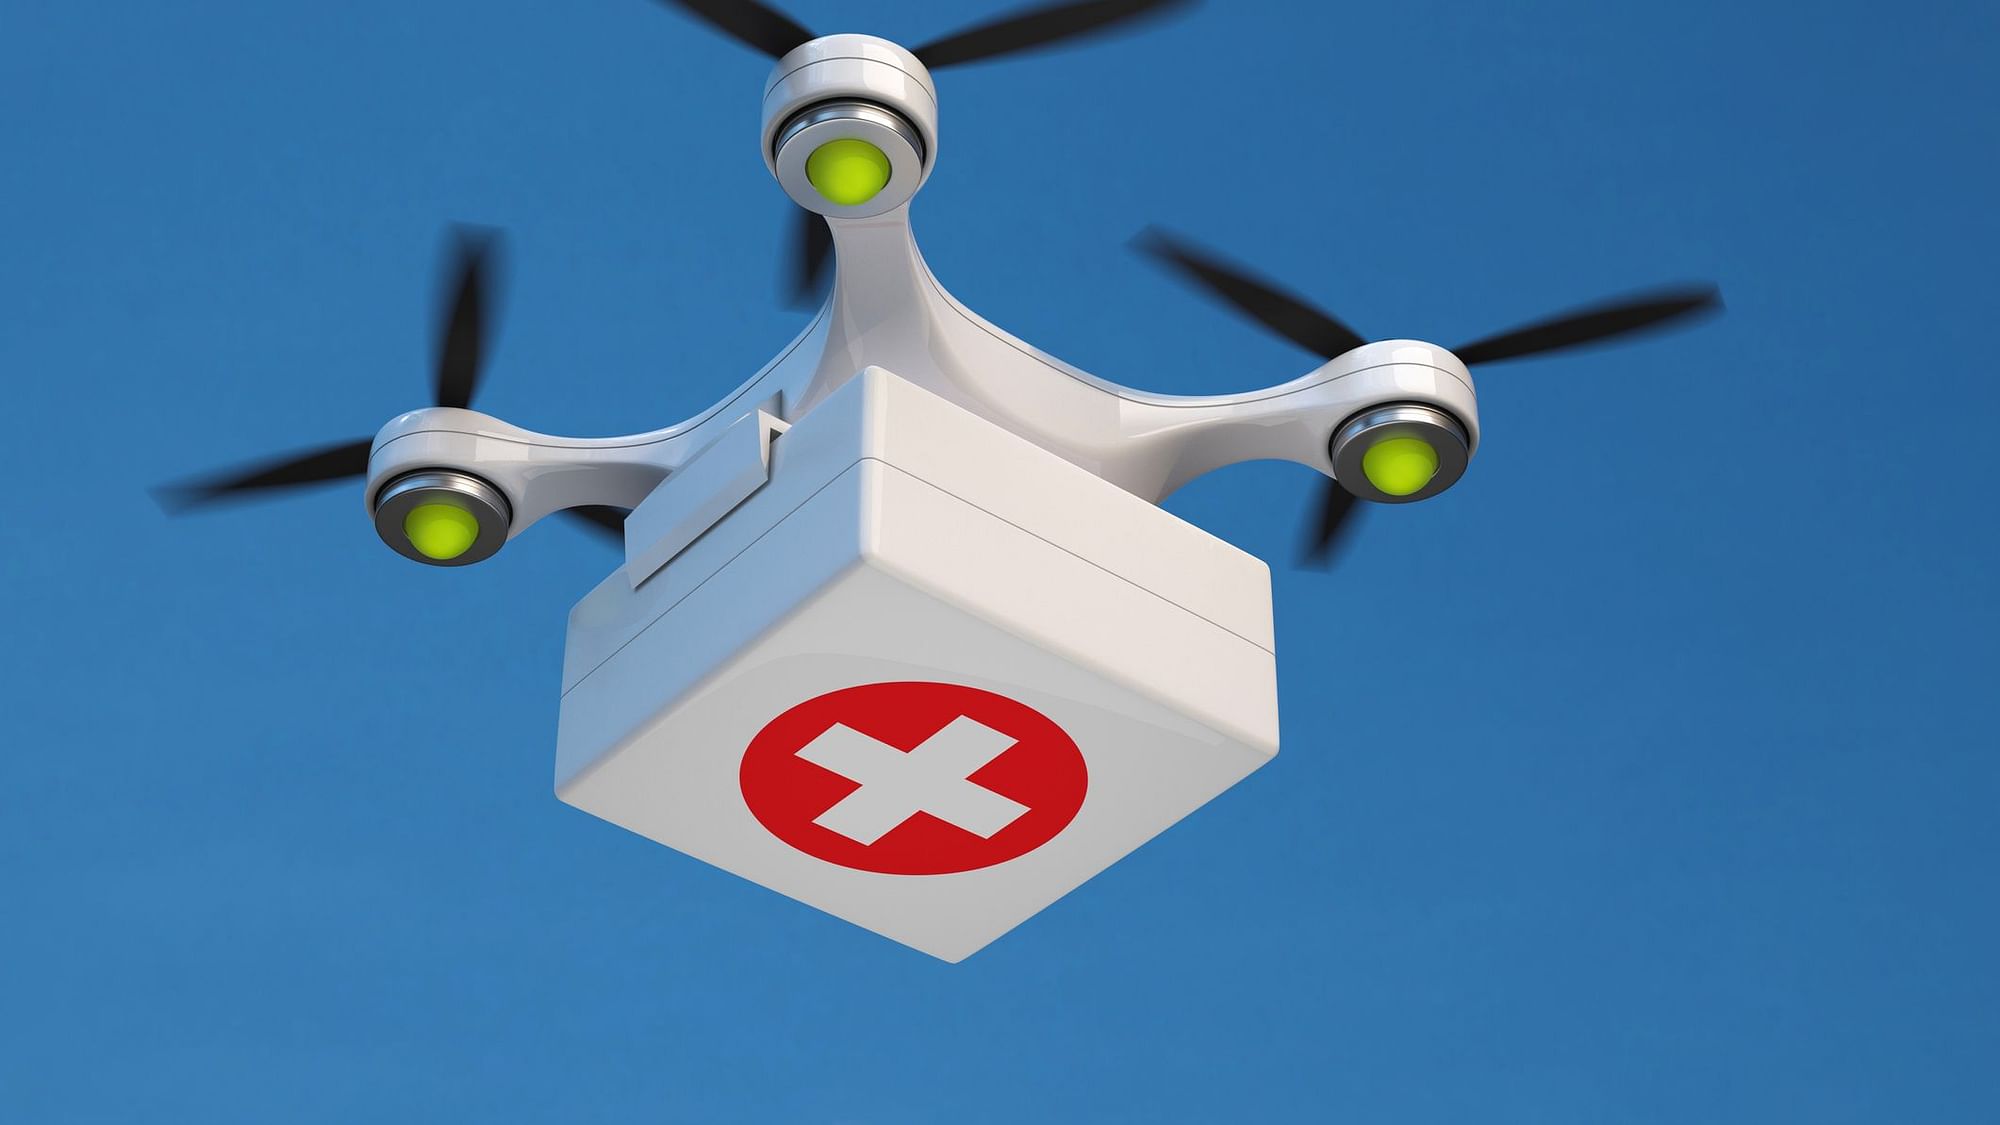 During rush hours drones could reach critically ill patients three minutes faster than paramedics.